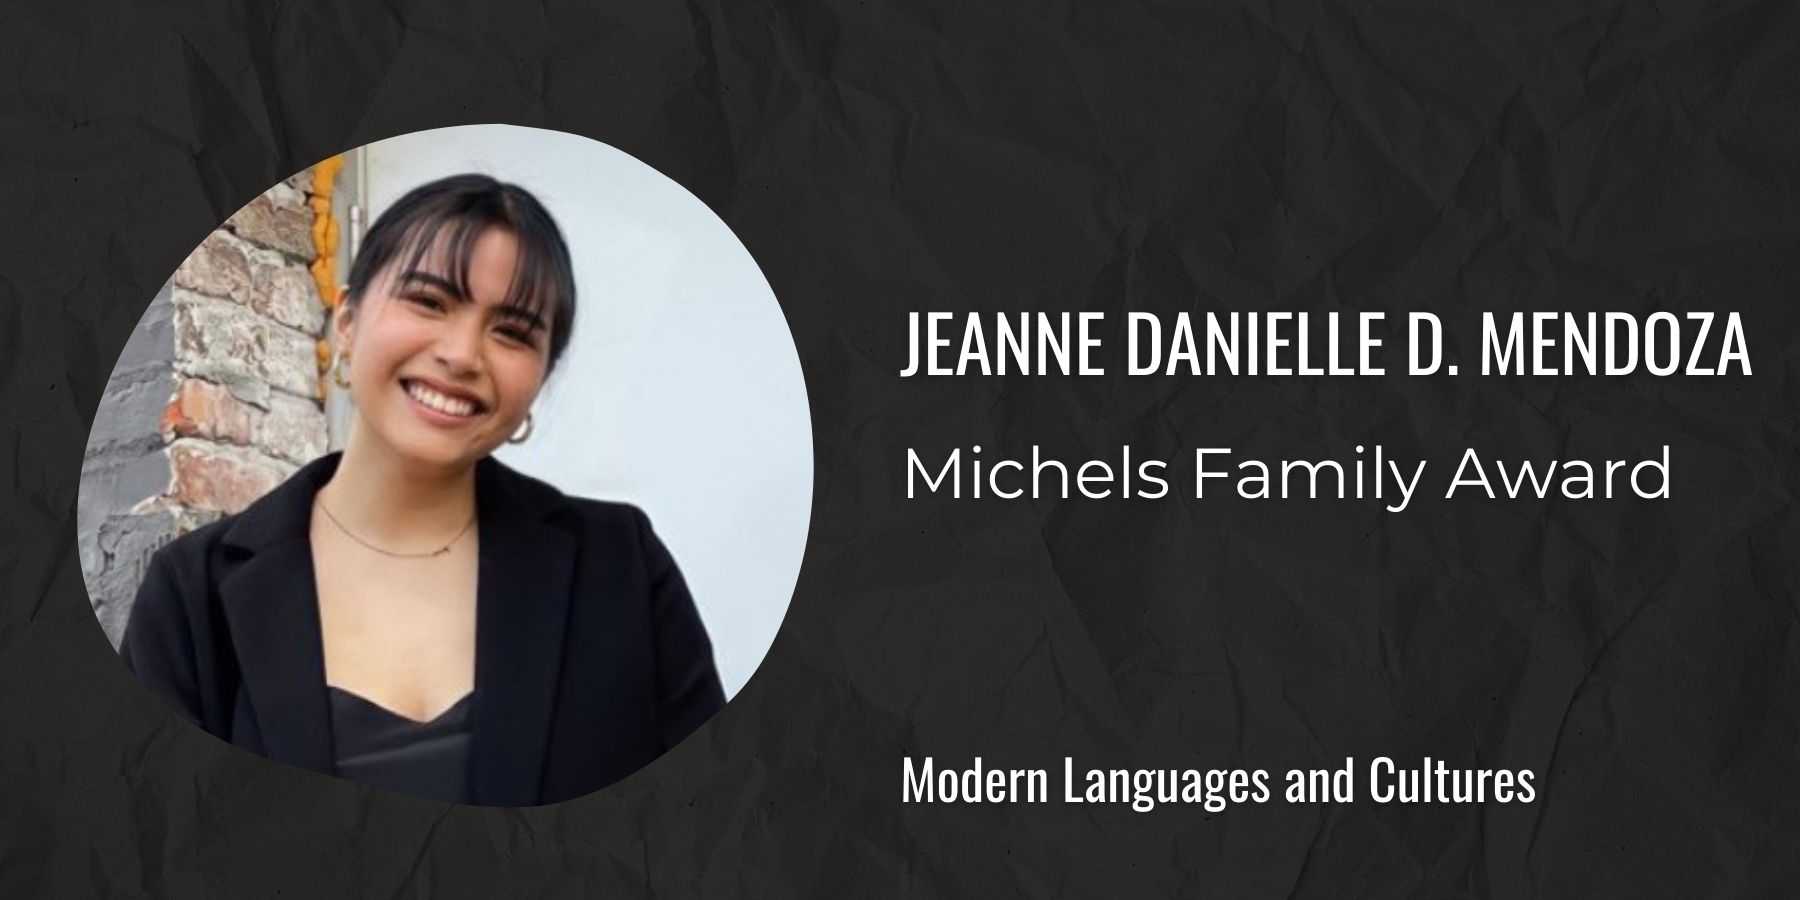 Image of Jeanne Danielle D. Mendoza with text: Michels Family Award, Modern Languages and Cultures
